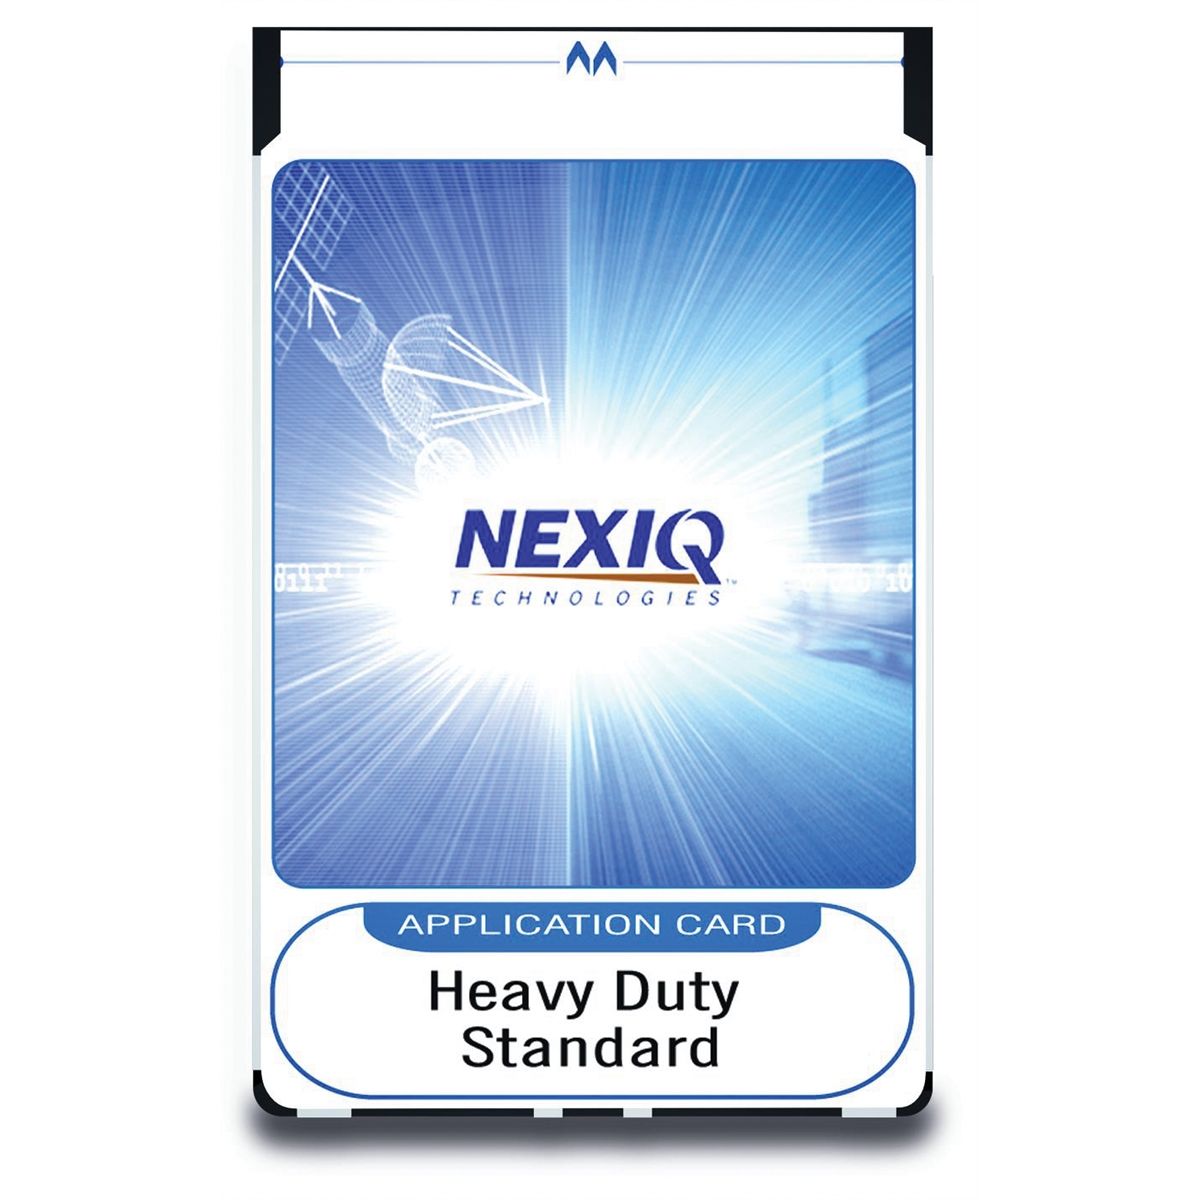 Heavy Duty Standard Application Card for MPC, Pro-Link Plus and